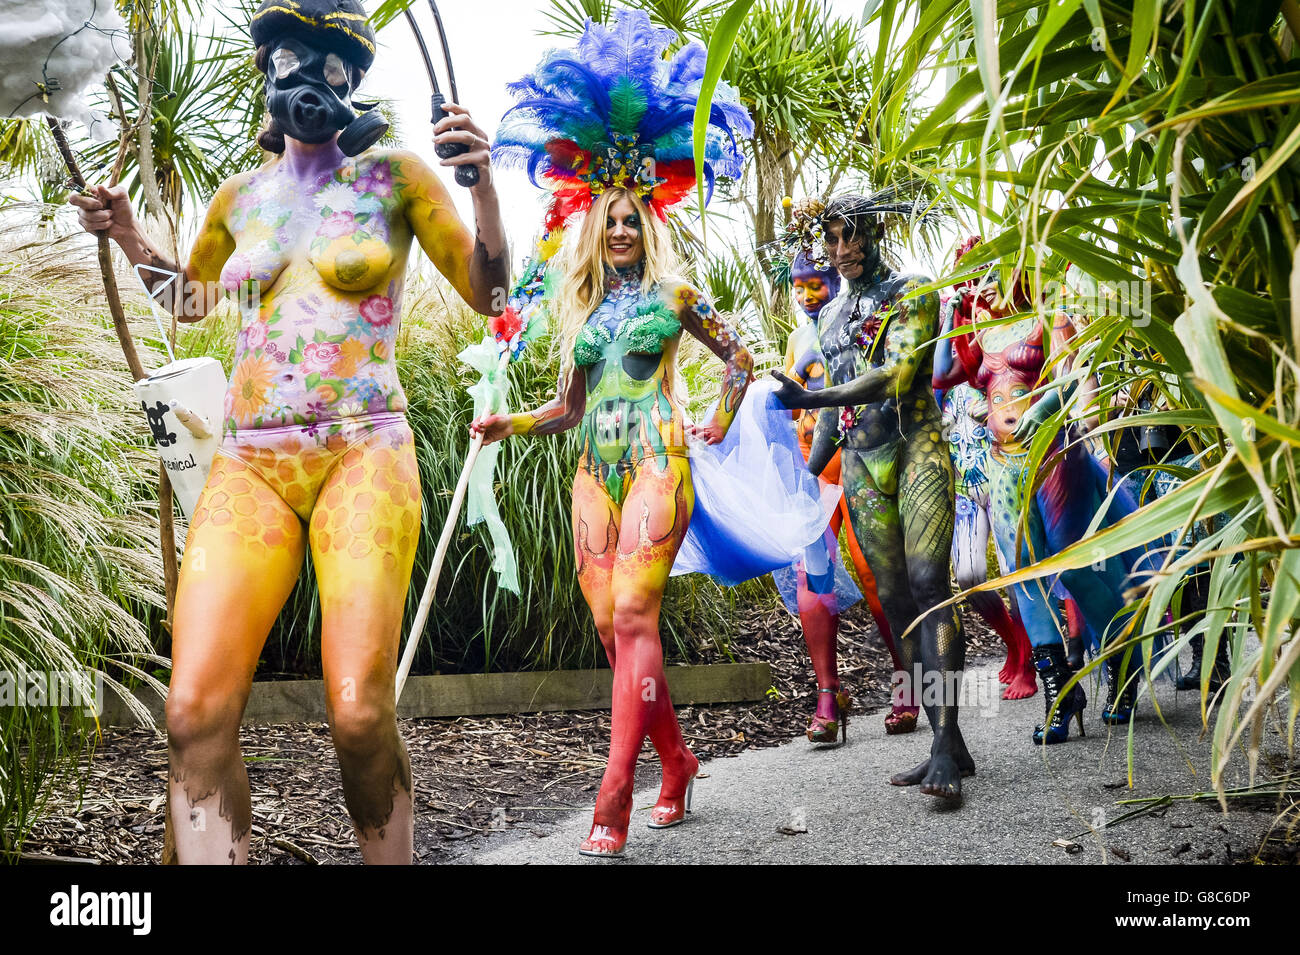 Models make their way through foliage as they parade inside the Mediterranean Biome, during the BodyFactory International Body Painting Festival two-day event at the Eden Project, Cornwall. Stock Photo